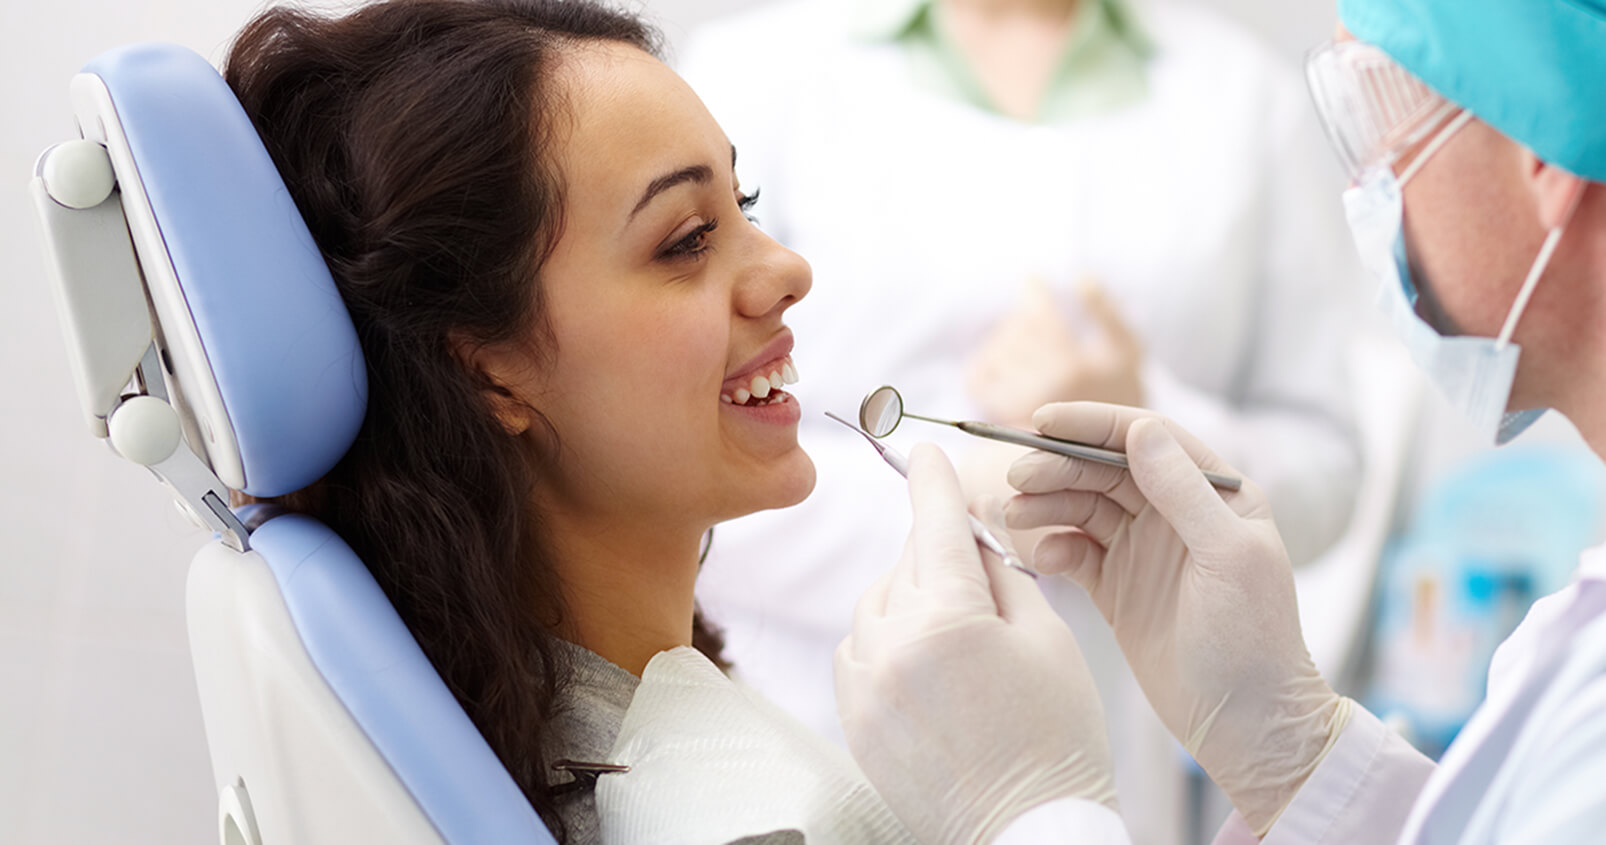 Dental Inlays and Onlays Procedure at Gentle Care Dentistry in Azusa Area